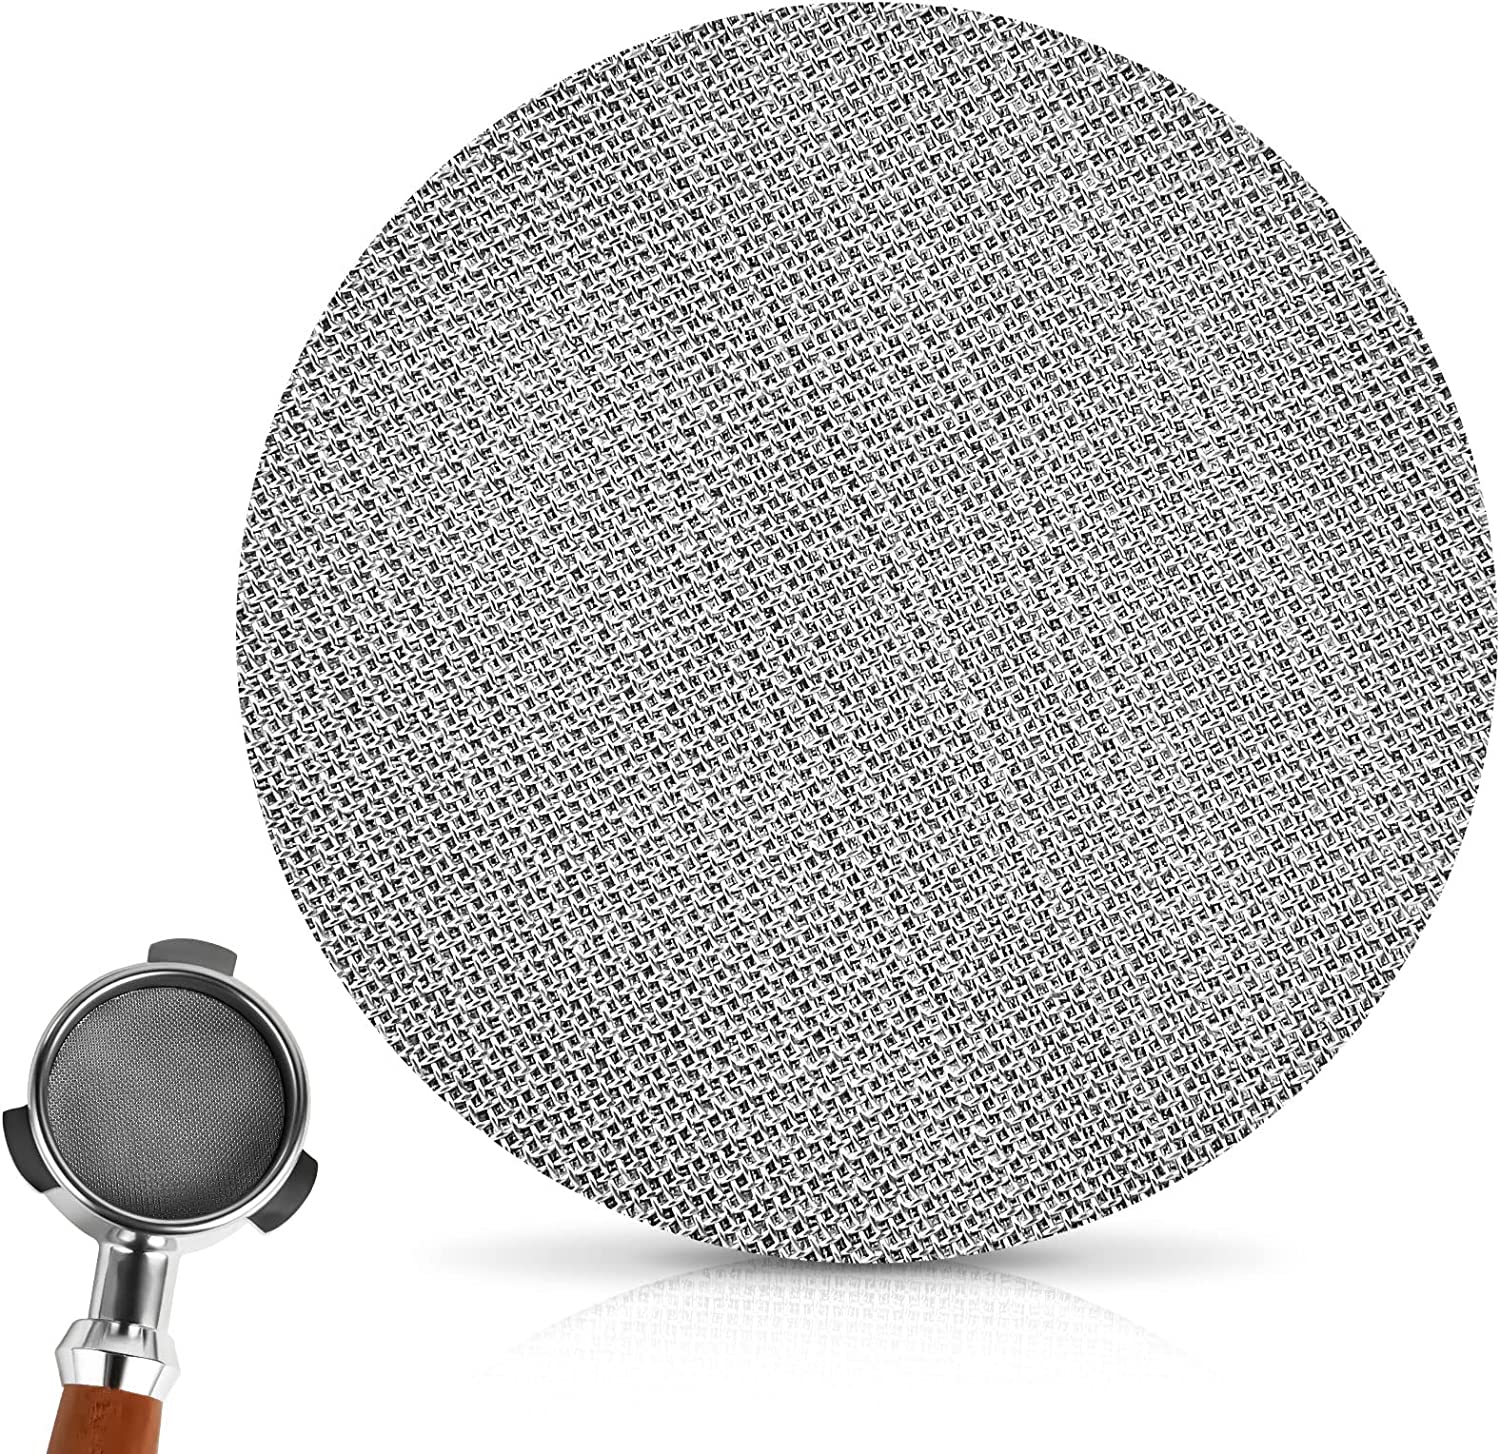 Hotut puck screen 51 mm, espresso puck strainer, coffee filter plate 1.7 mm thickness 150 μm, stainless steel 316l, reusable puck filter for espresso filter holder